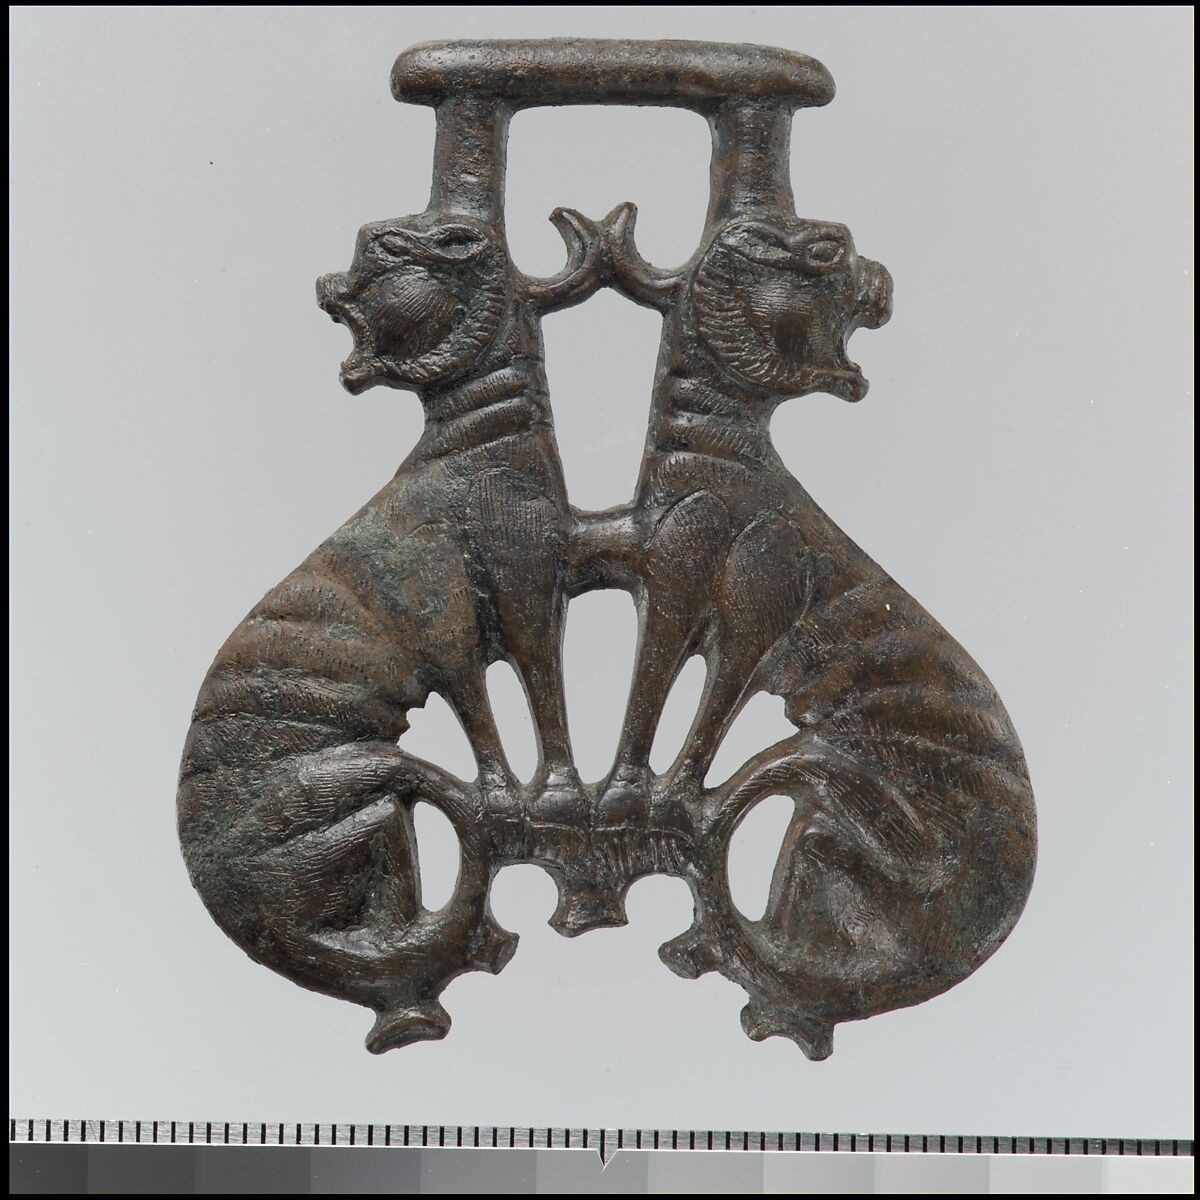 Harness Pendant with Confronted Beasts, Leaded brass, Visigothic 